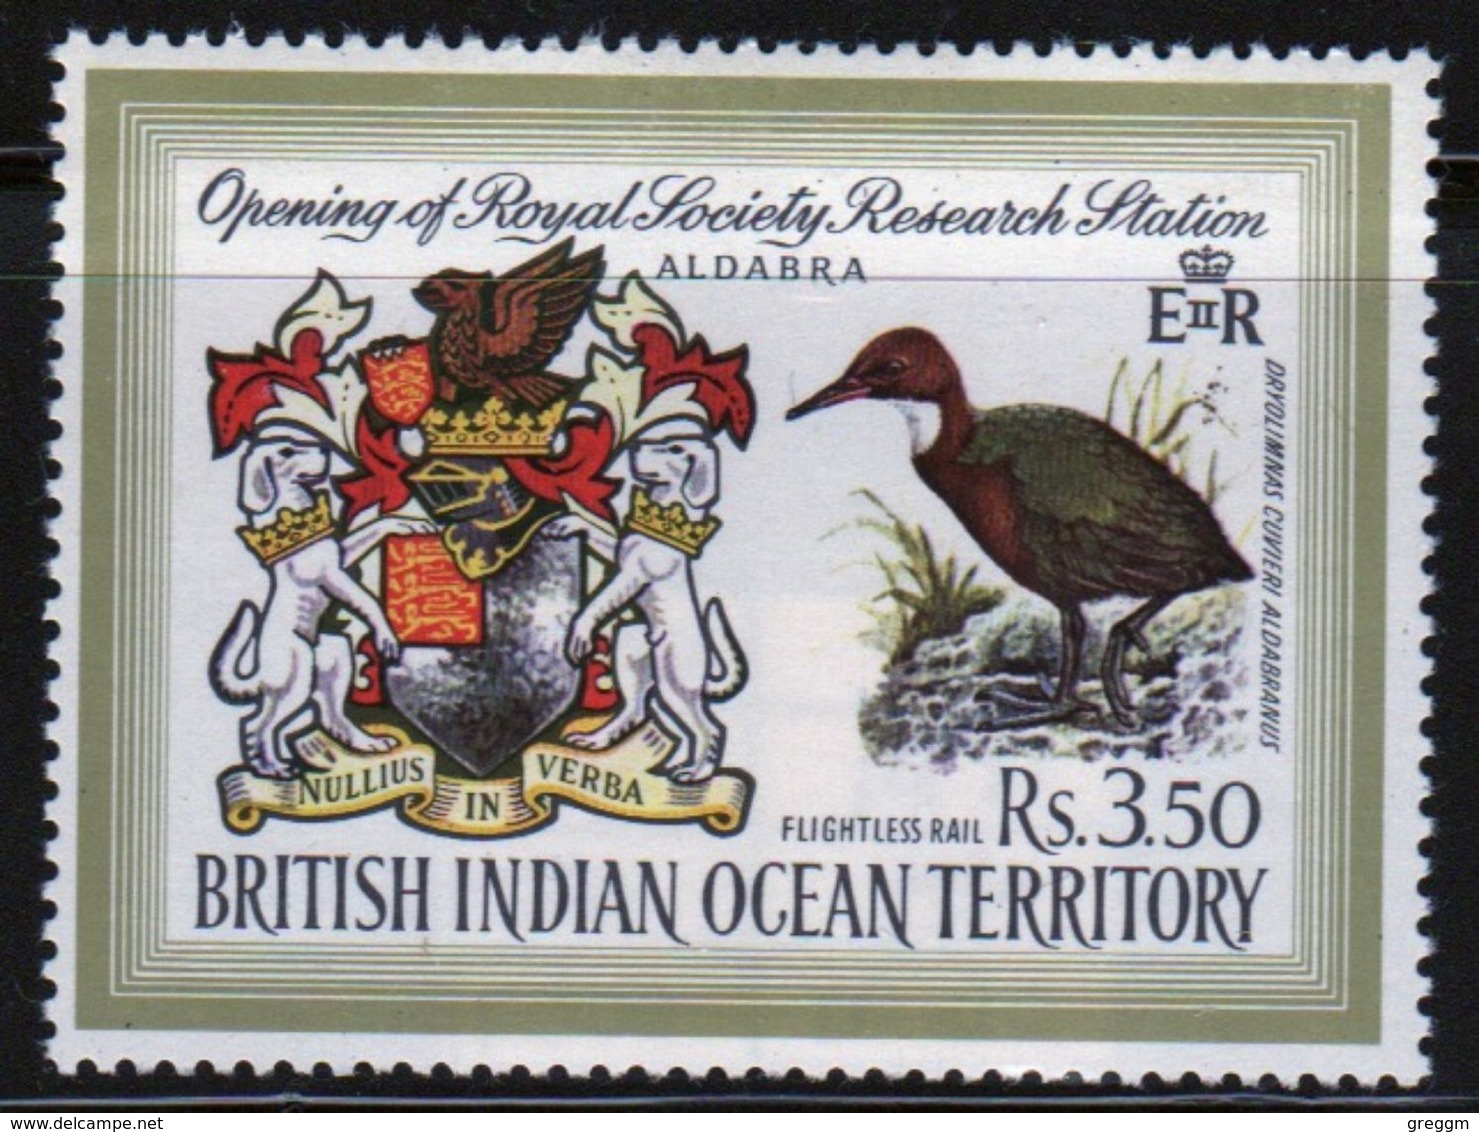 British Indian Ocean Territory 1971 Single Stamp Issue To Celebrate The Opening Of The Research Station. - British Indian Ocean Territory (BIOT)